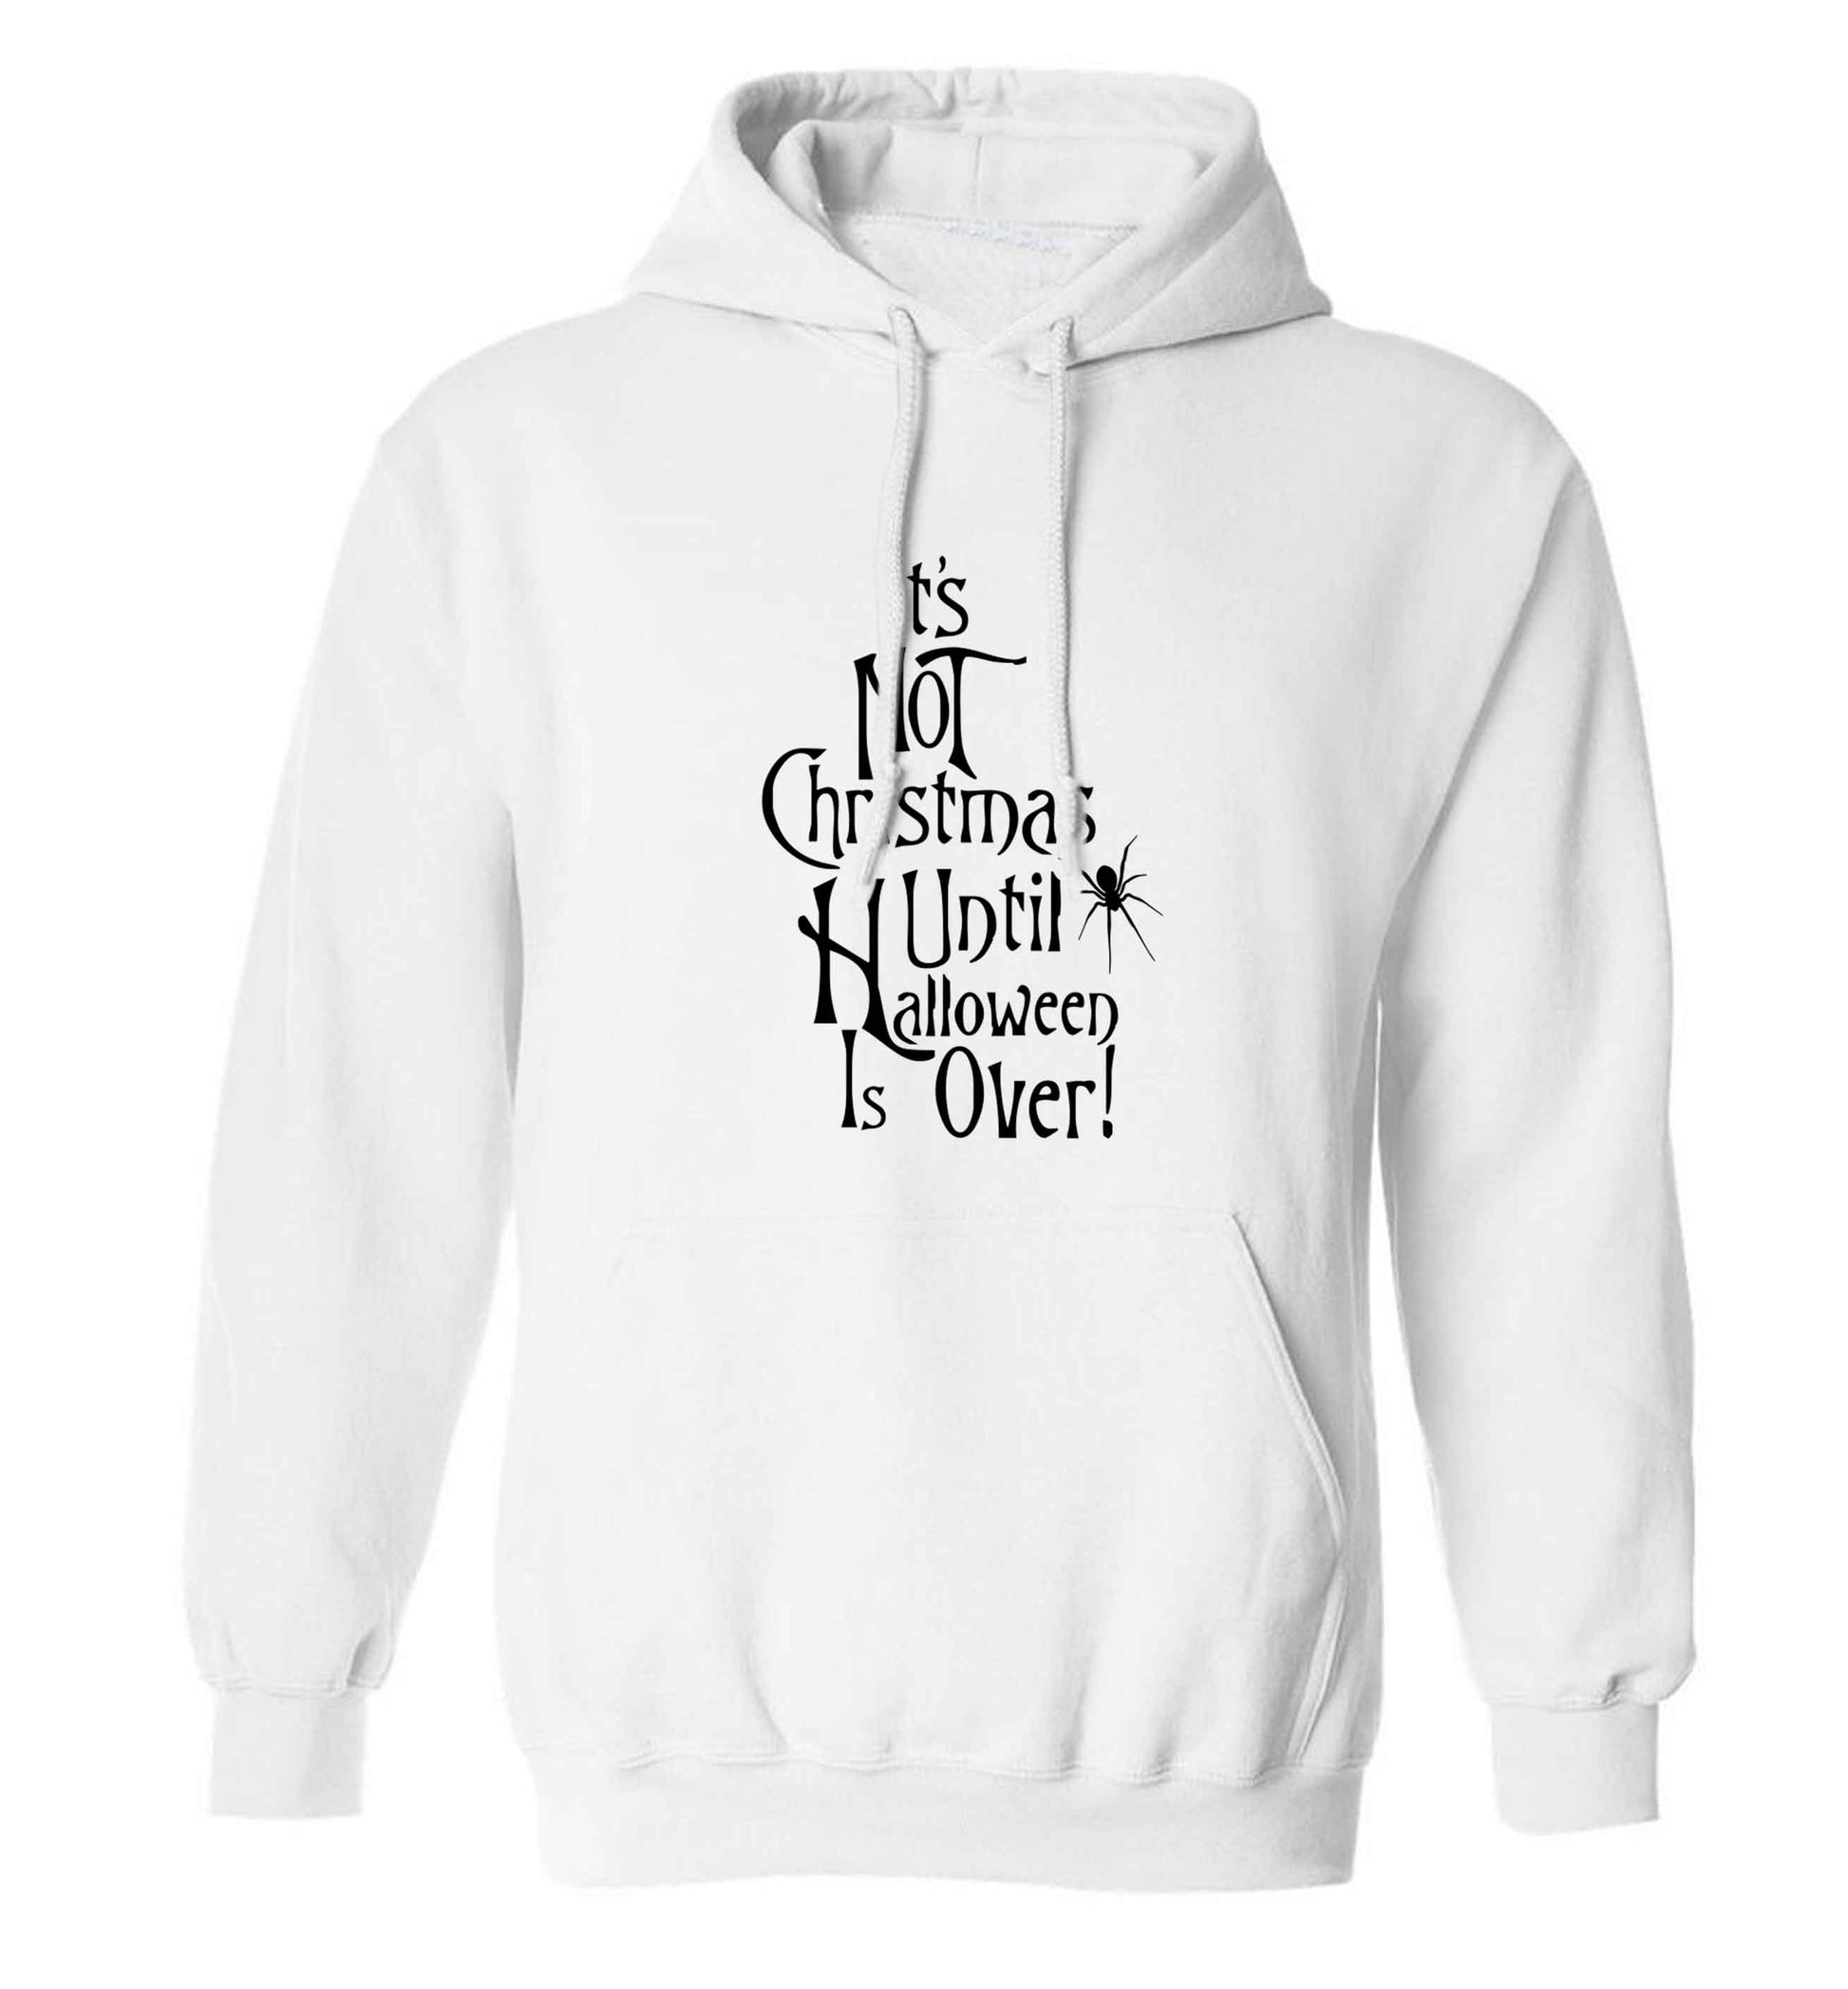 It's not Christmas until Halloween is over adults unisex white hoodie 2XL